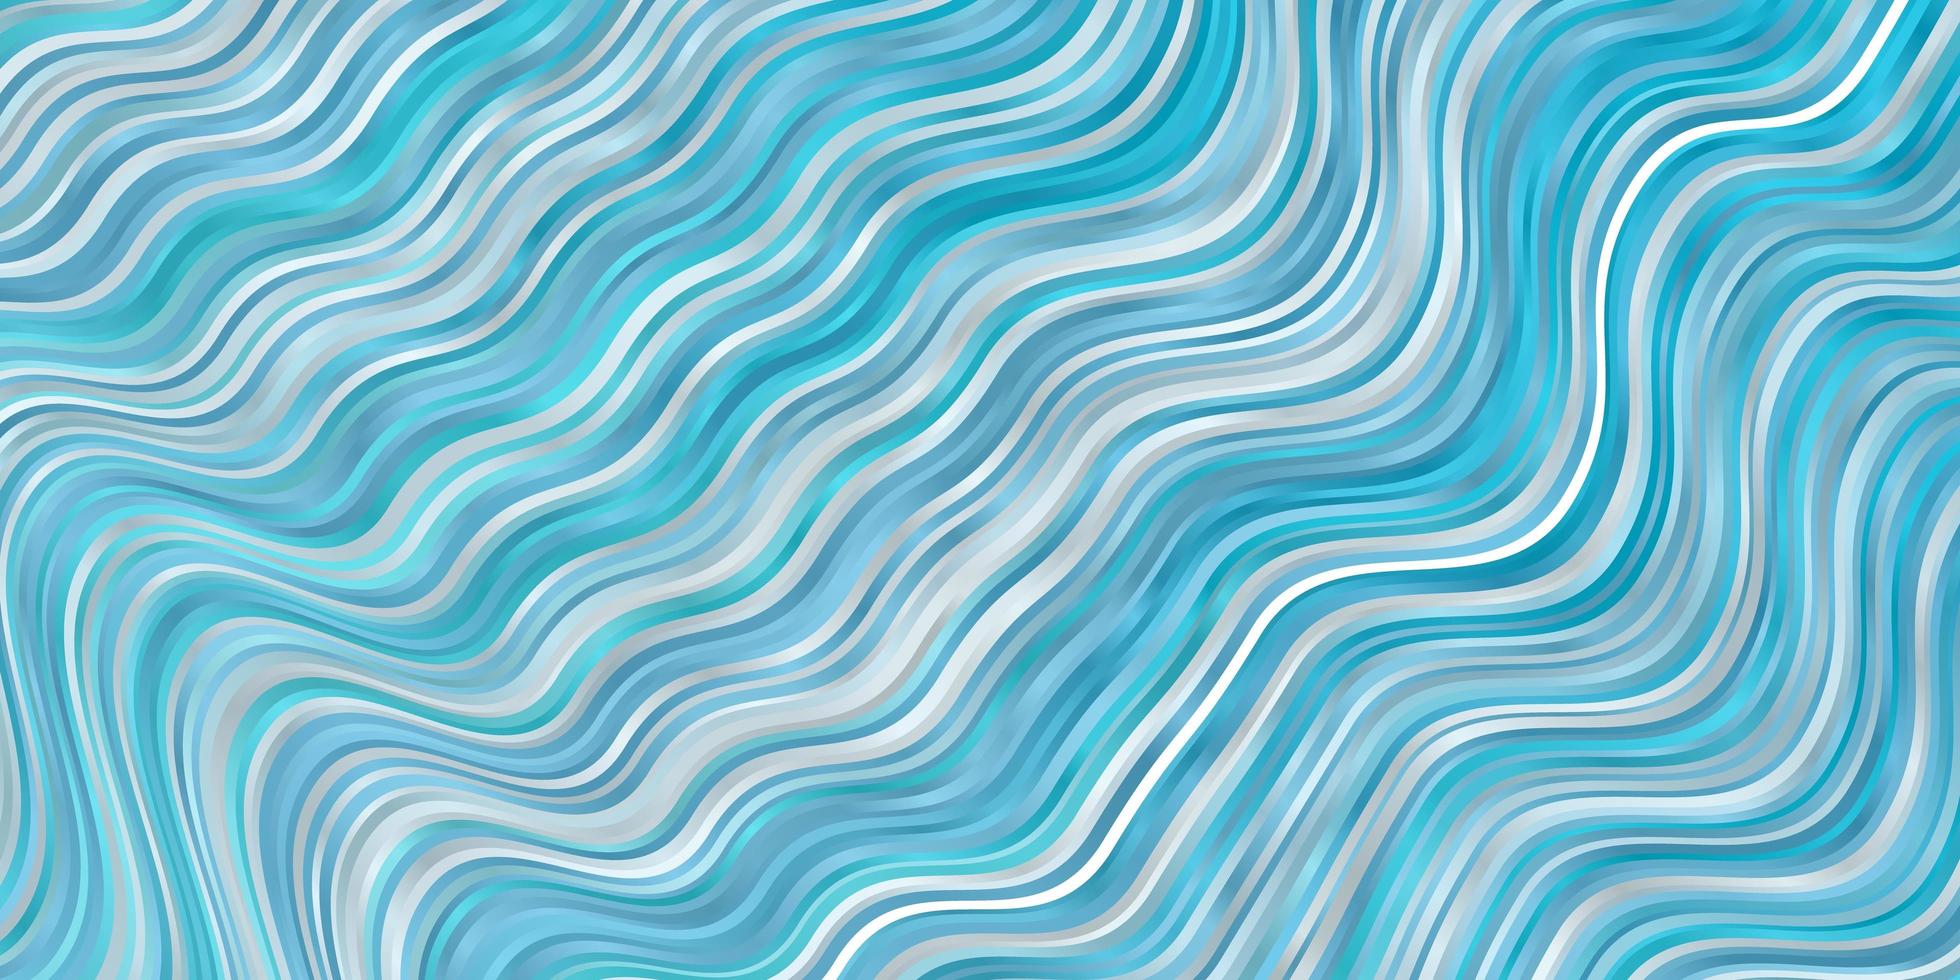 Light BLUE vector texture with wry lines